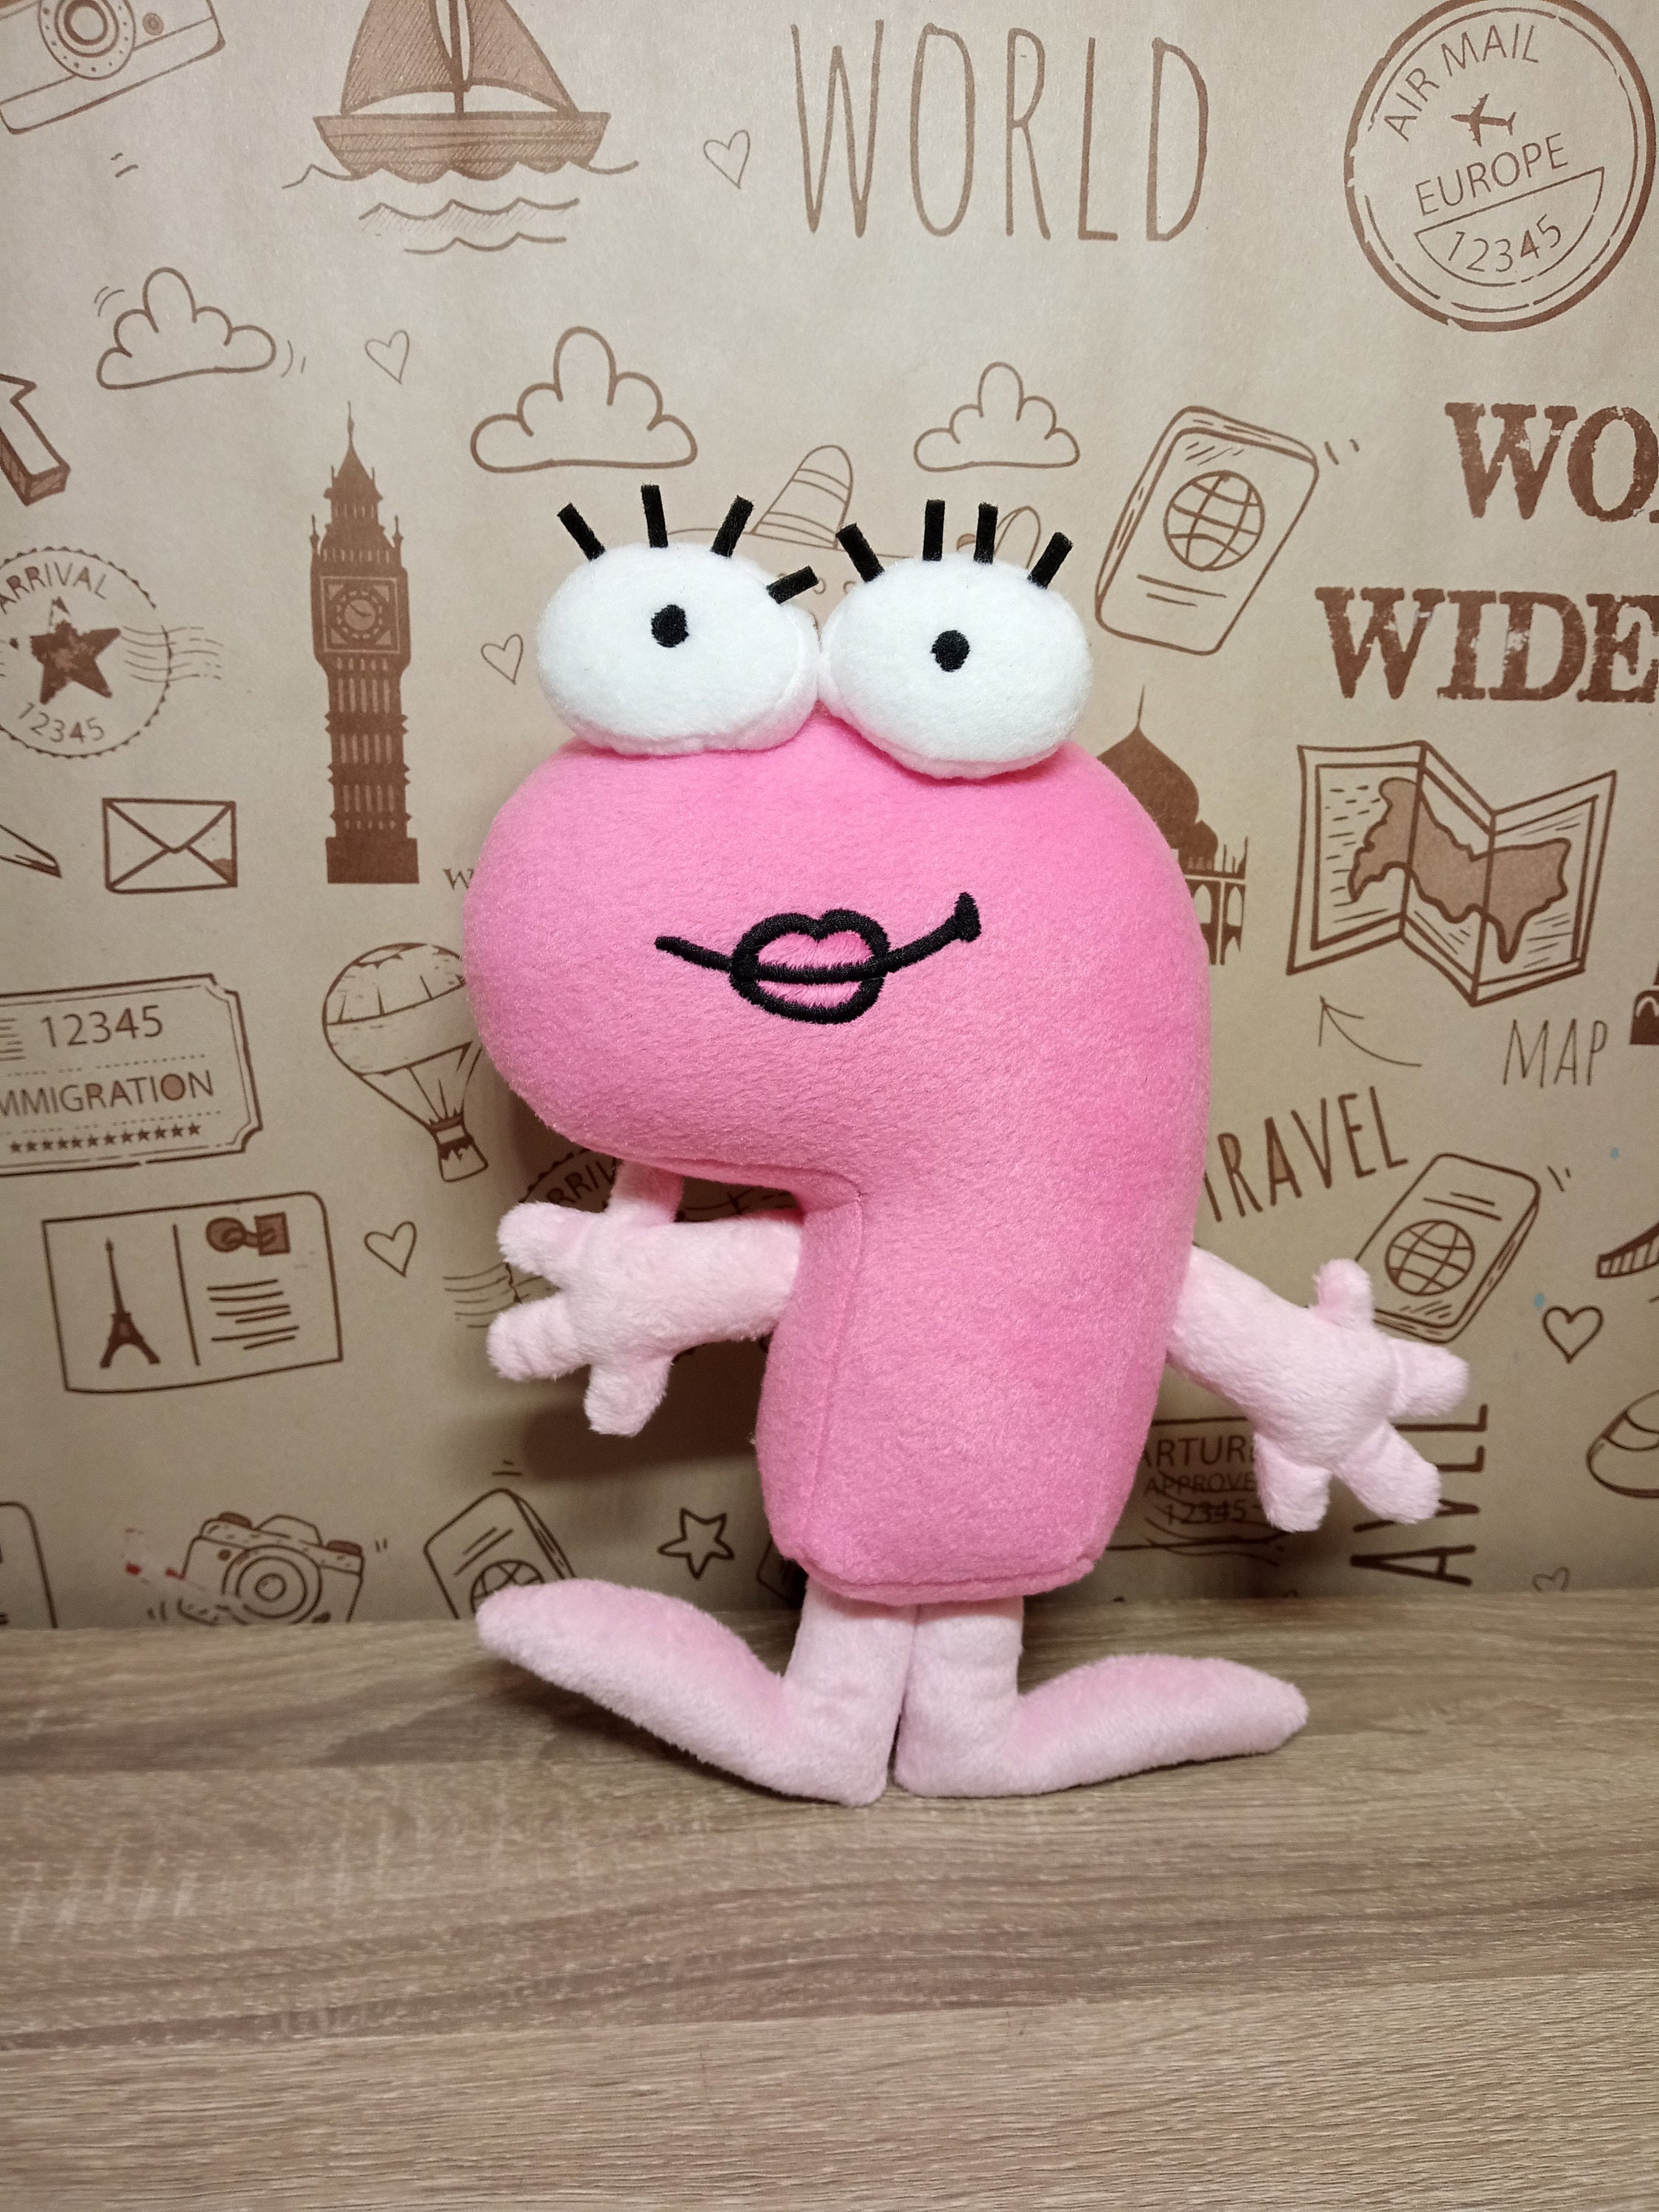 Marker and Coiny plush have arrived! 